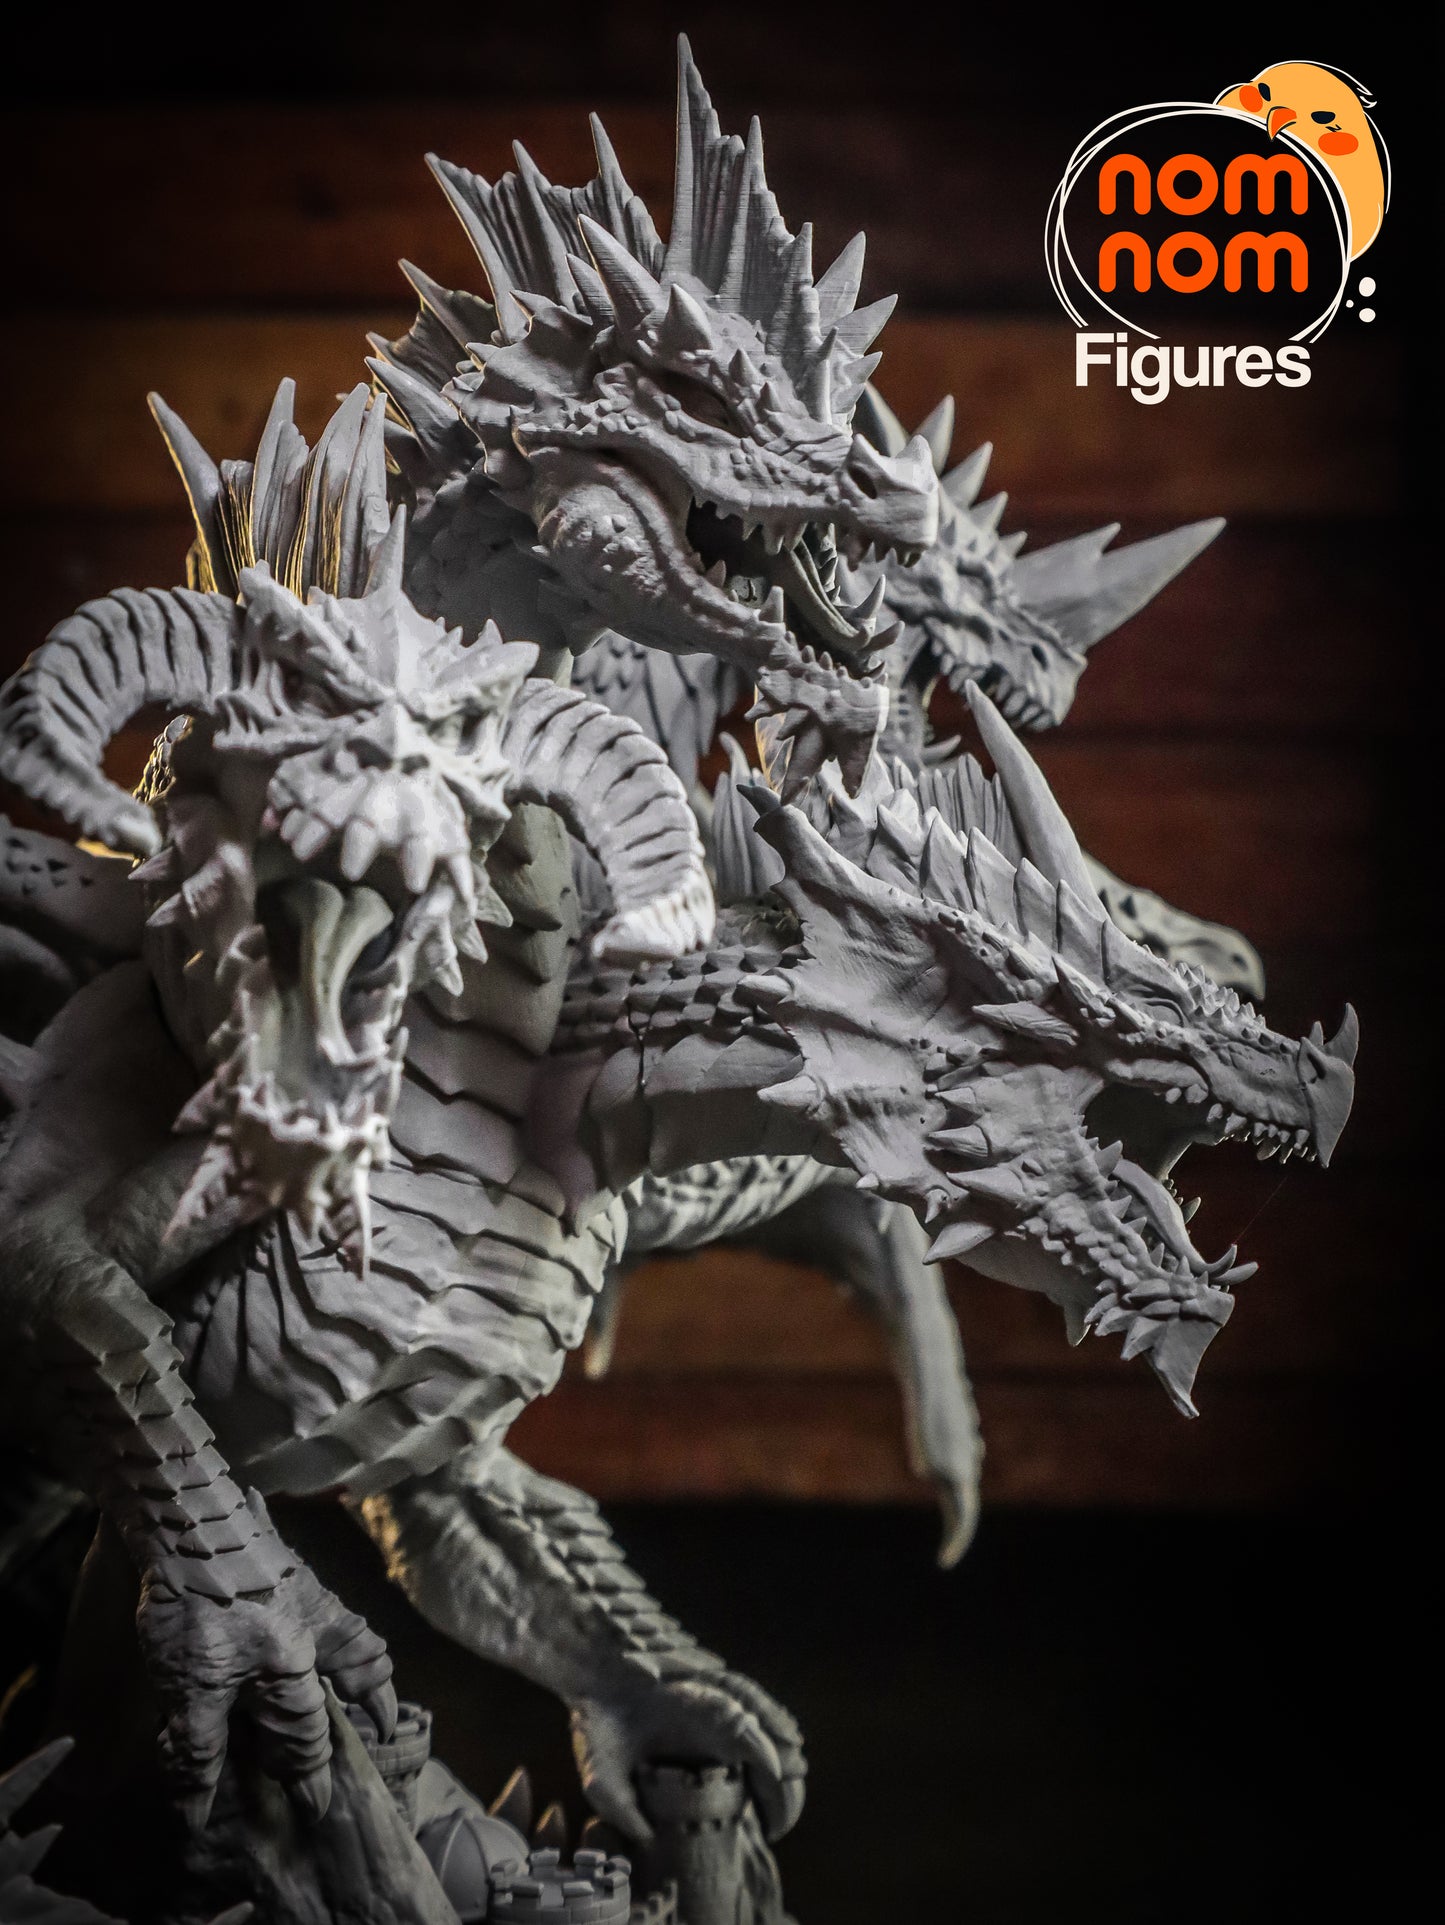 Tiamat - Dungeons and Dragons